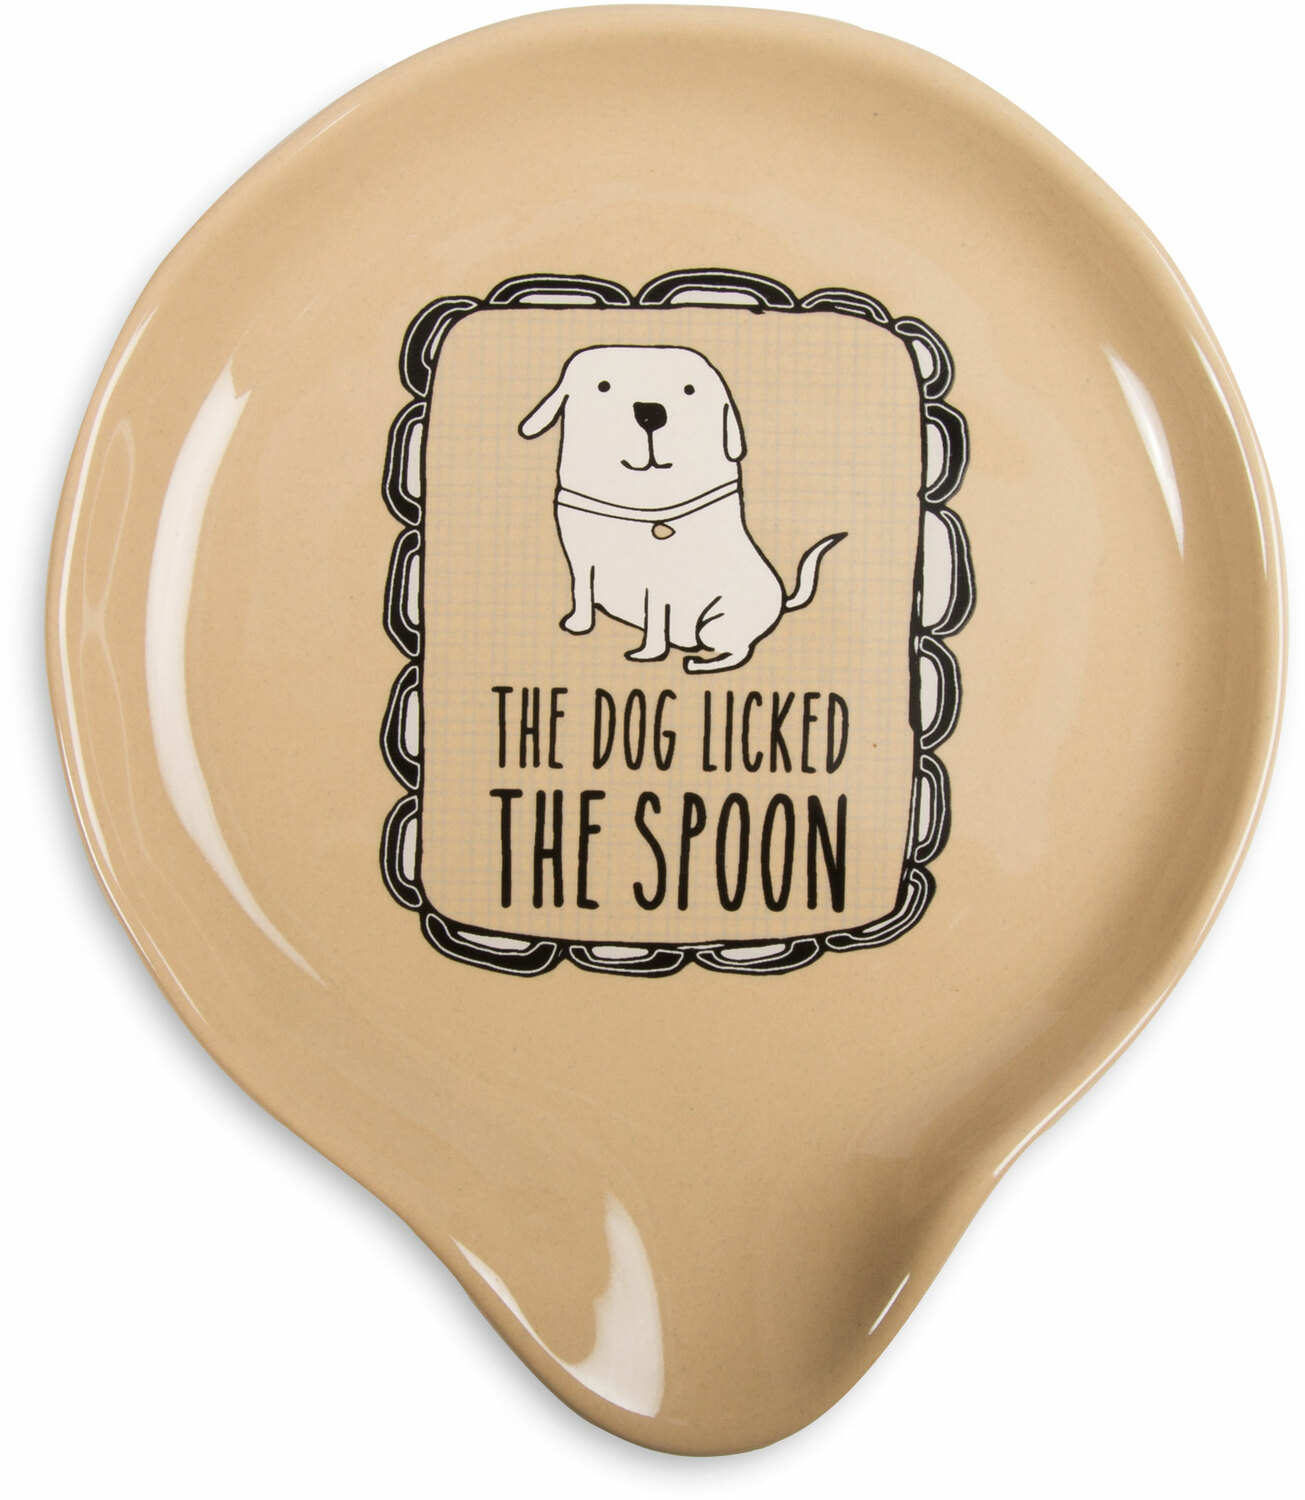 Dog Licked the Spoon by It's Cats and Dogs - Dog Licked the Spoon - 5" Spoon Rest